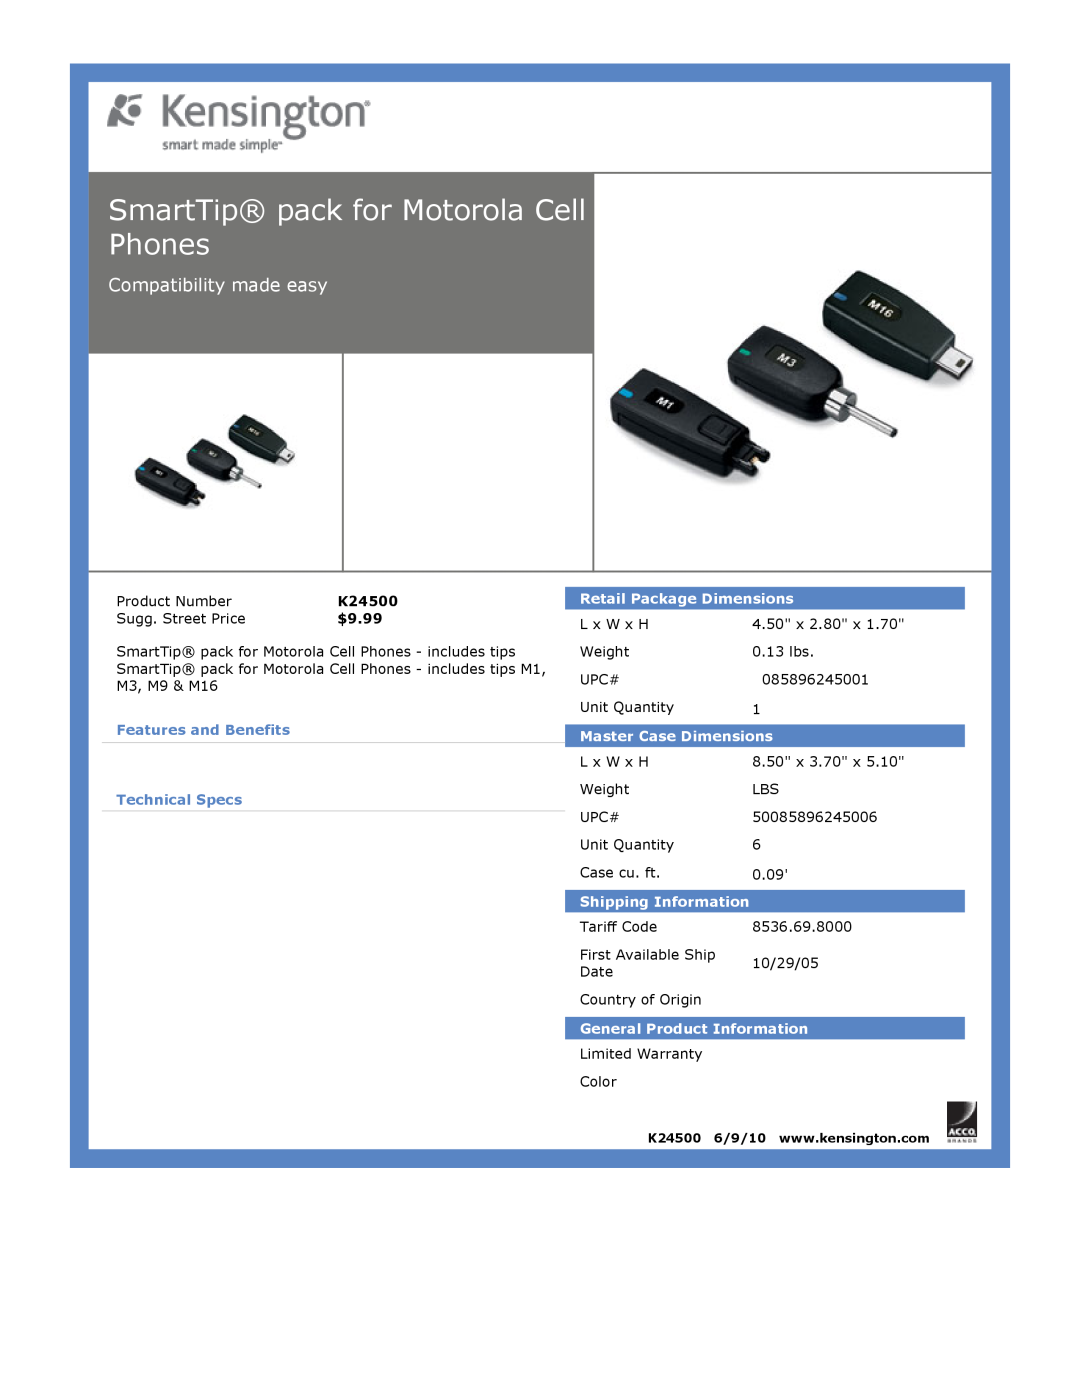 Kensington EU64325 SmartTip pack for Motorola Cell Phones, Compatibility made easy, $9.99, Retail Package Dimensions 